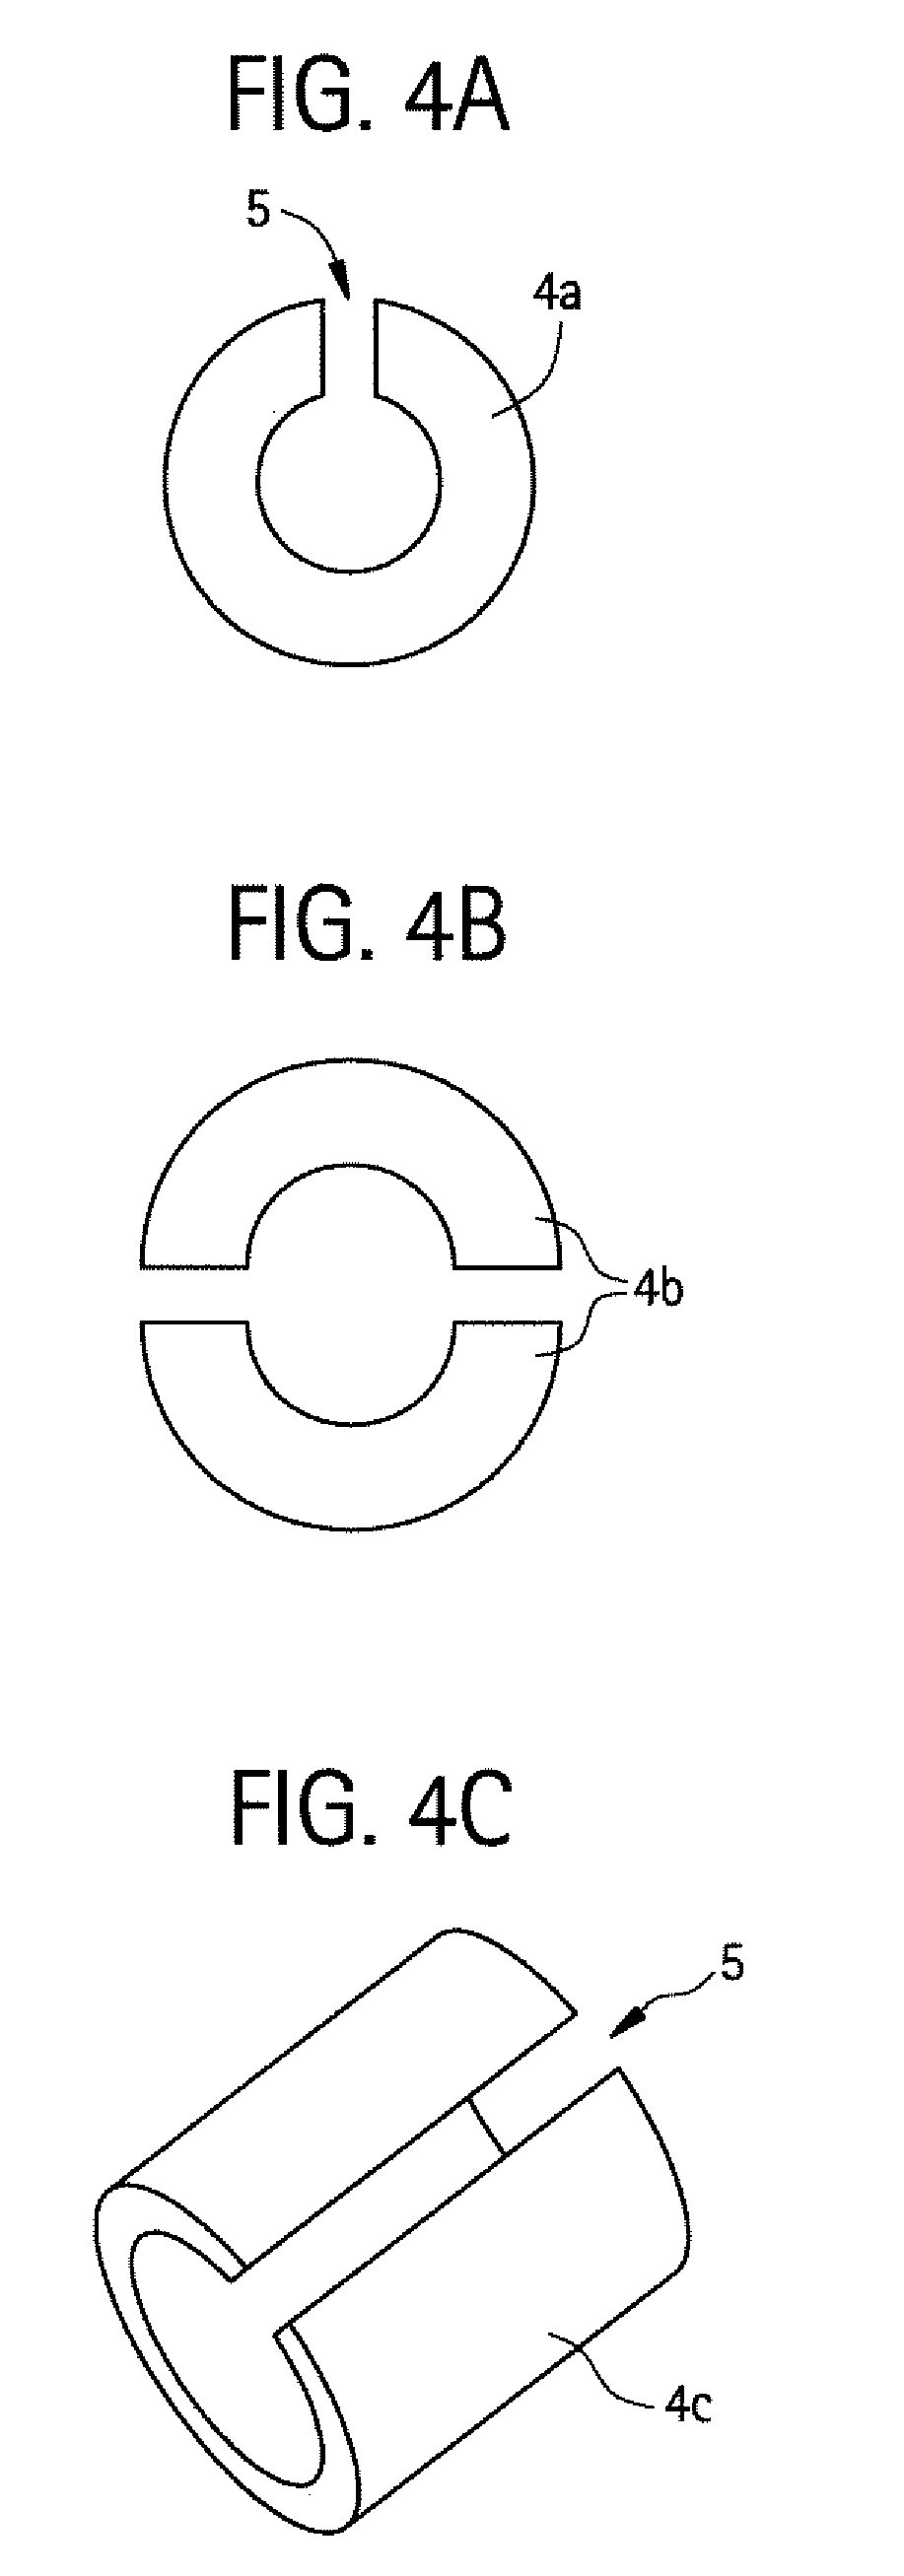 Method of forming a bioabsorbable drug delivery devices